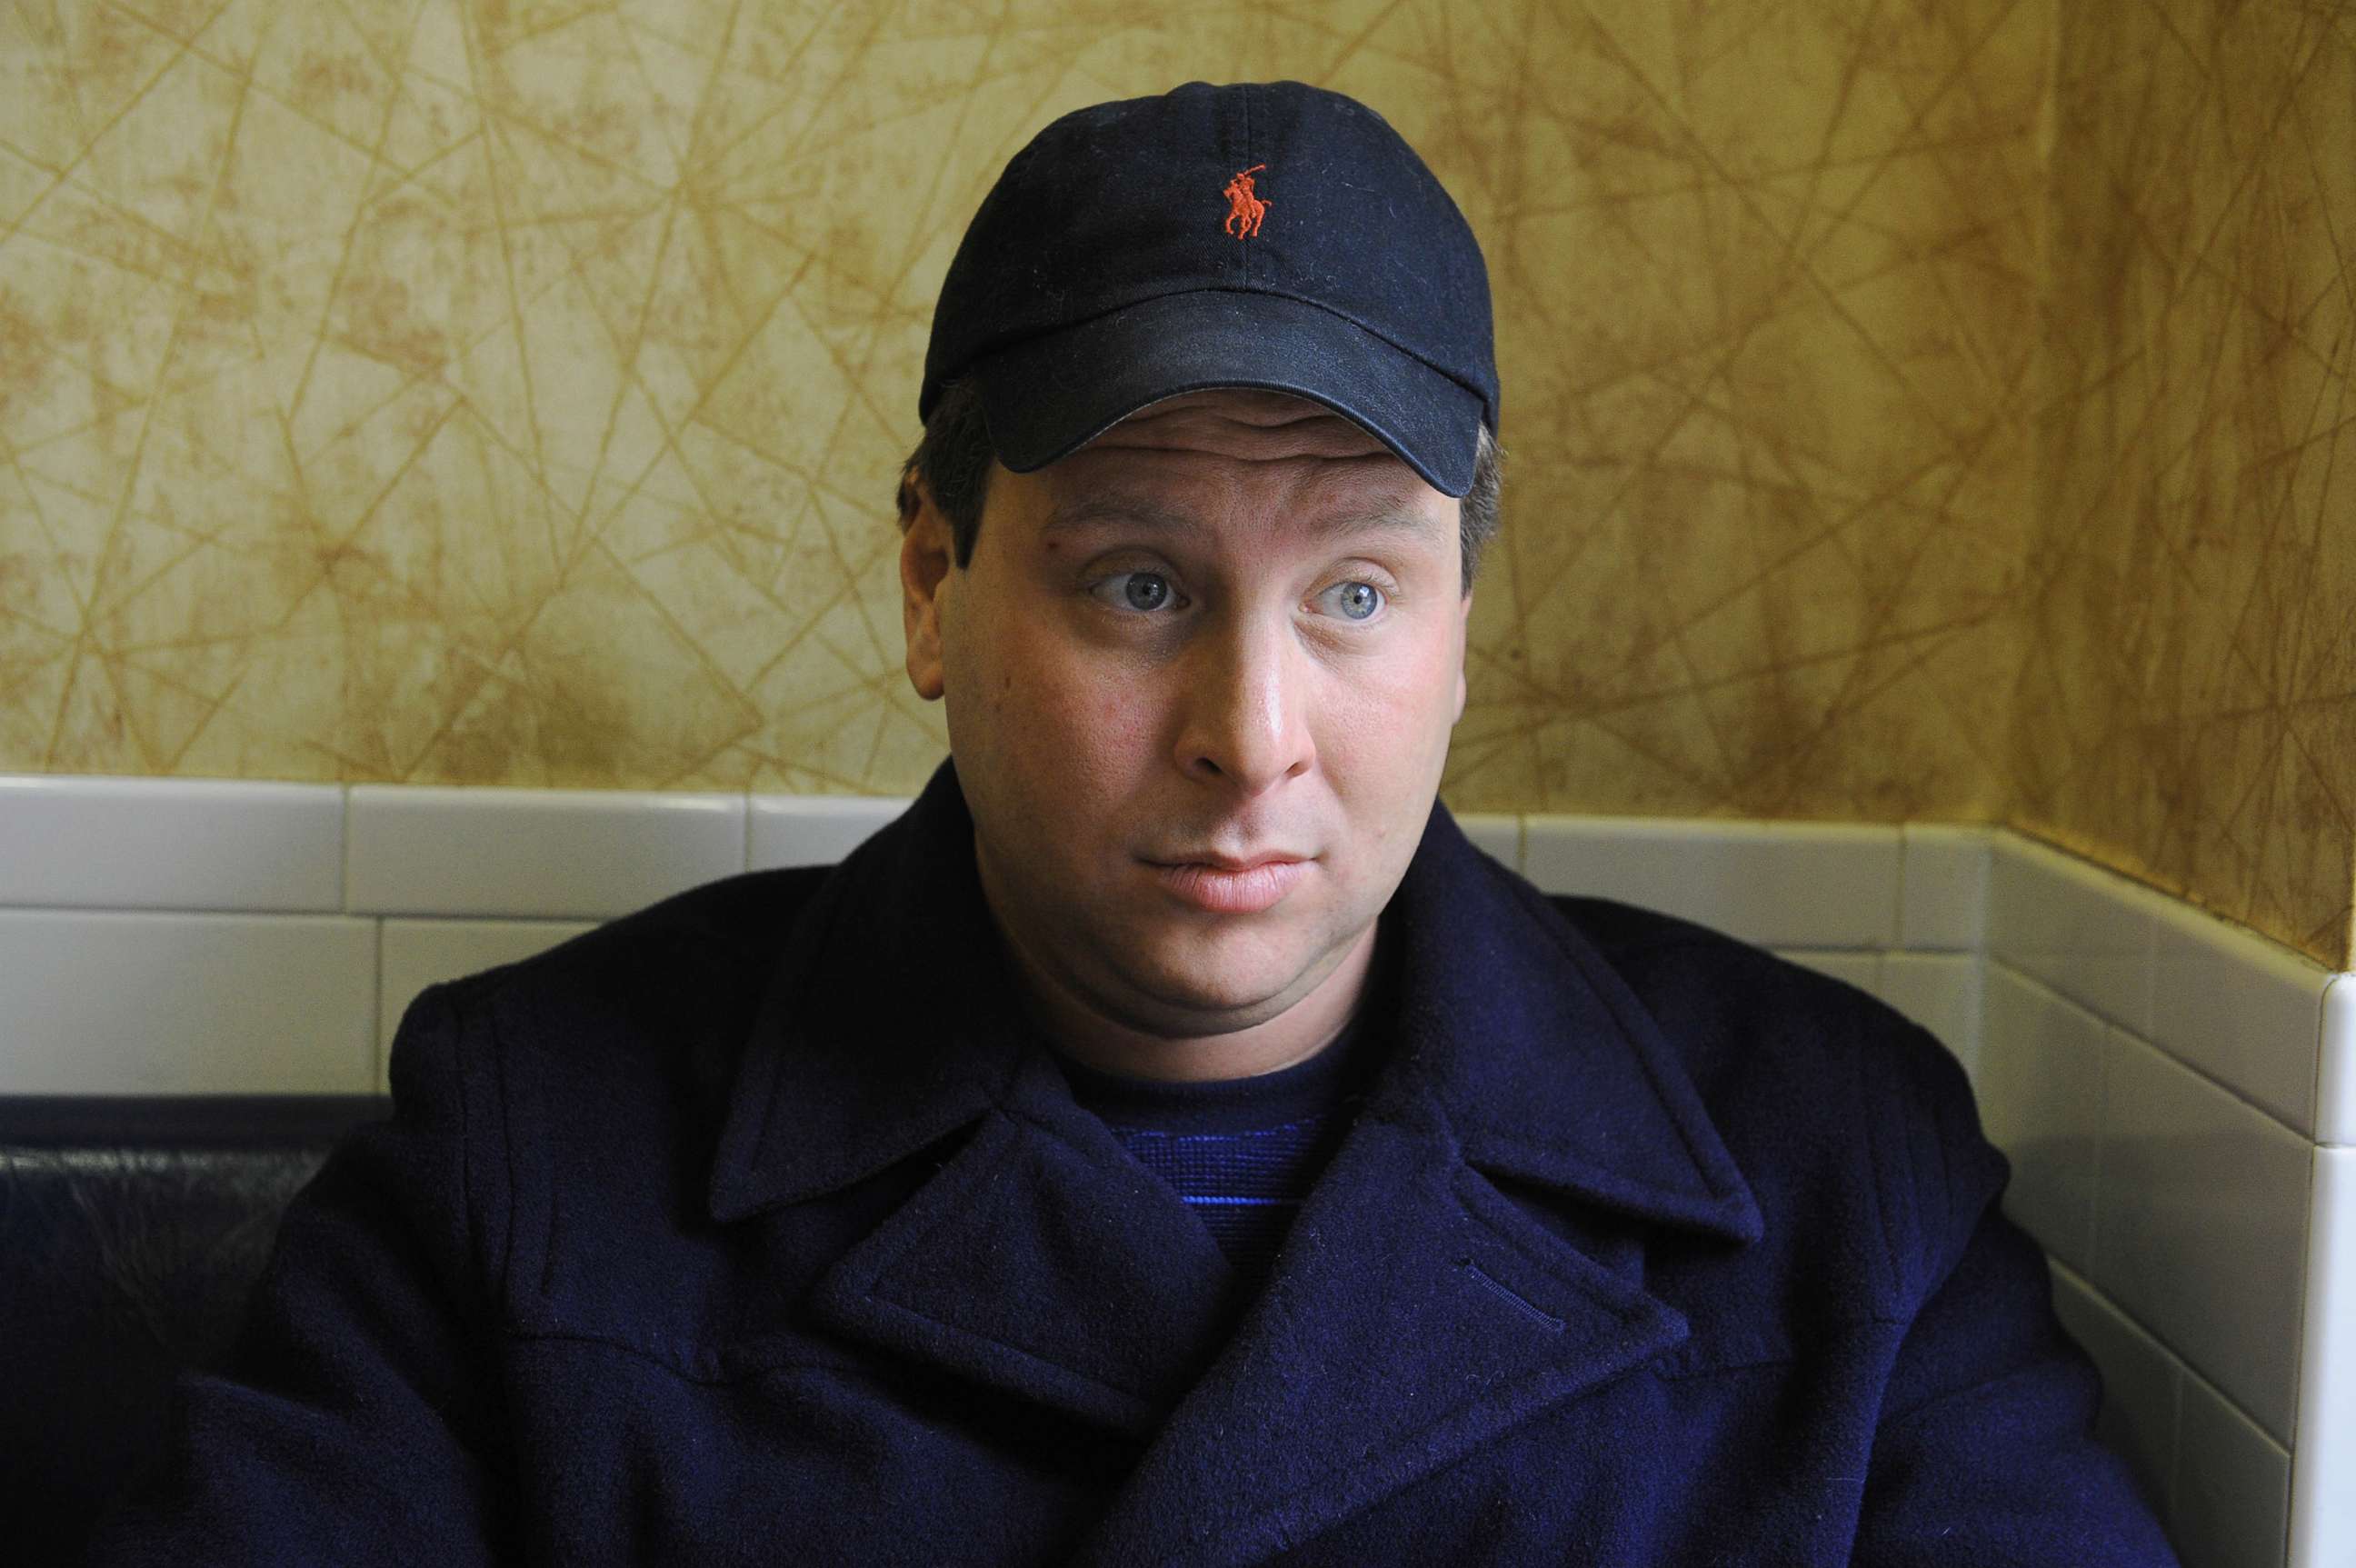 PHOTO: Political consultant Sam Nunberg is pictured during an interview with New York Post on Feb. 15 2014.